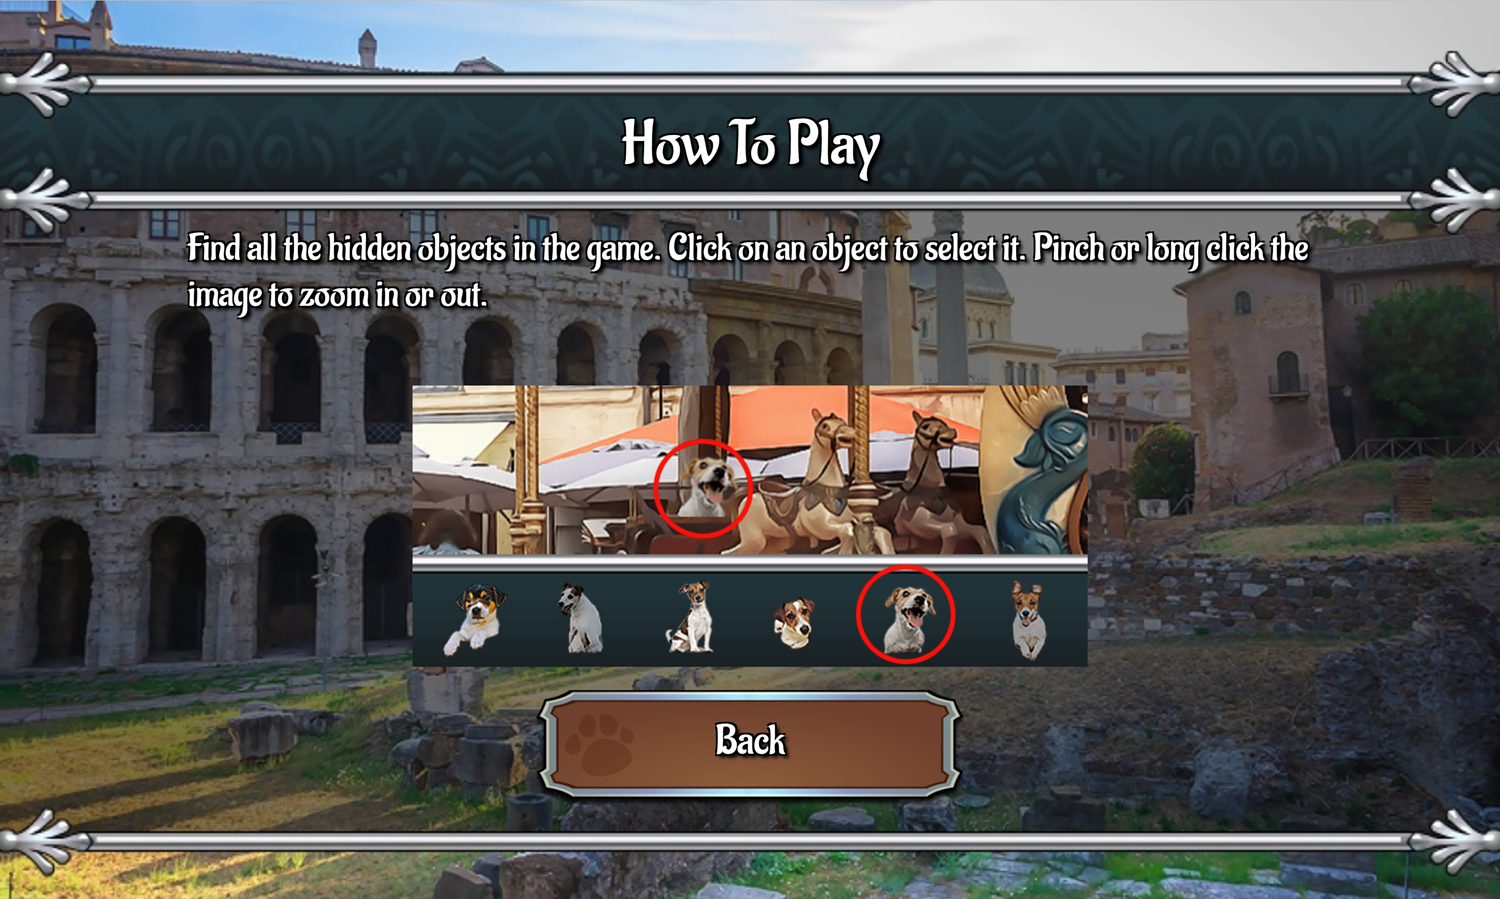 Hunting Jack in the City Game How to Play Screen Screenshot.